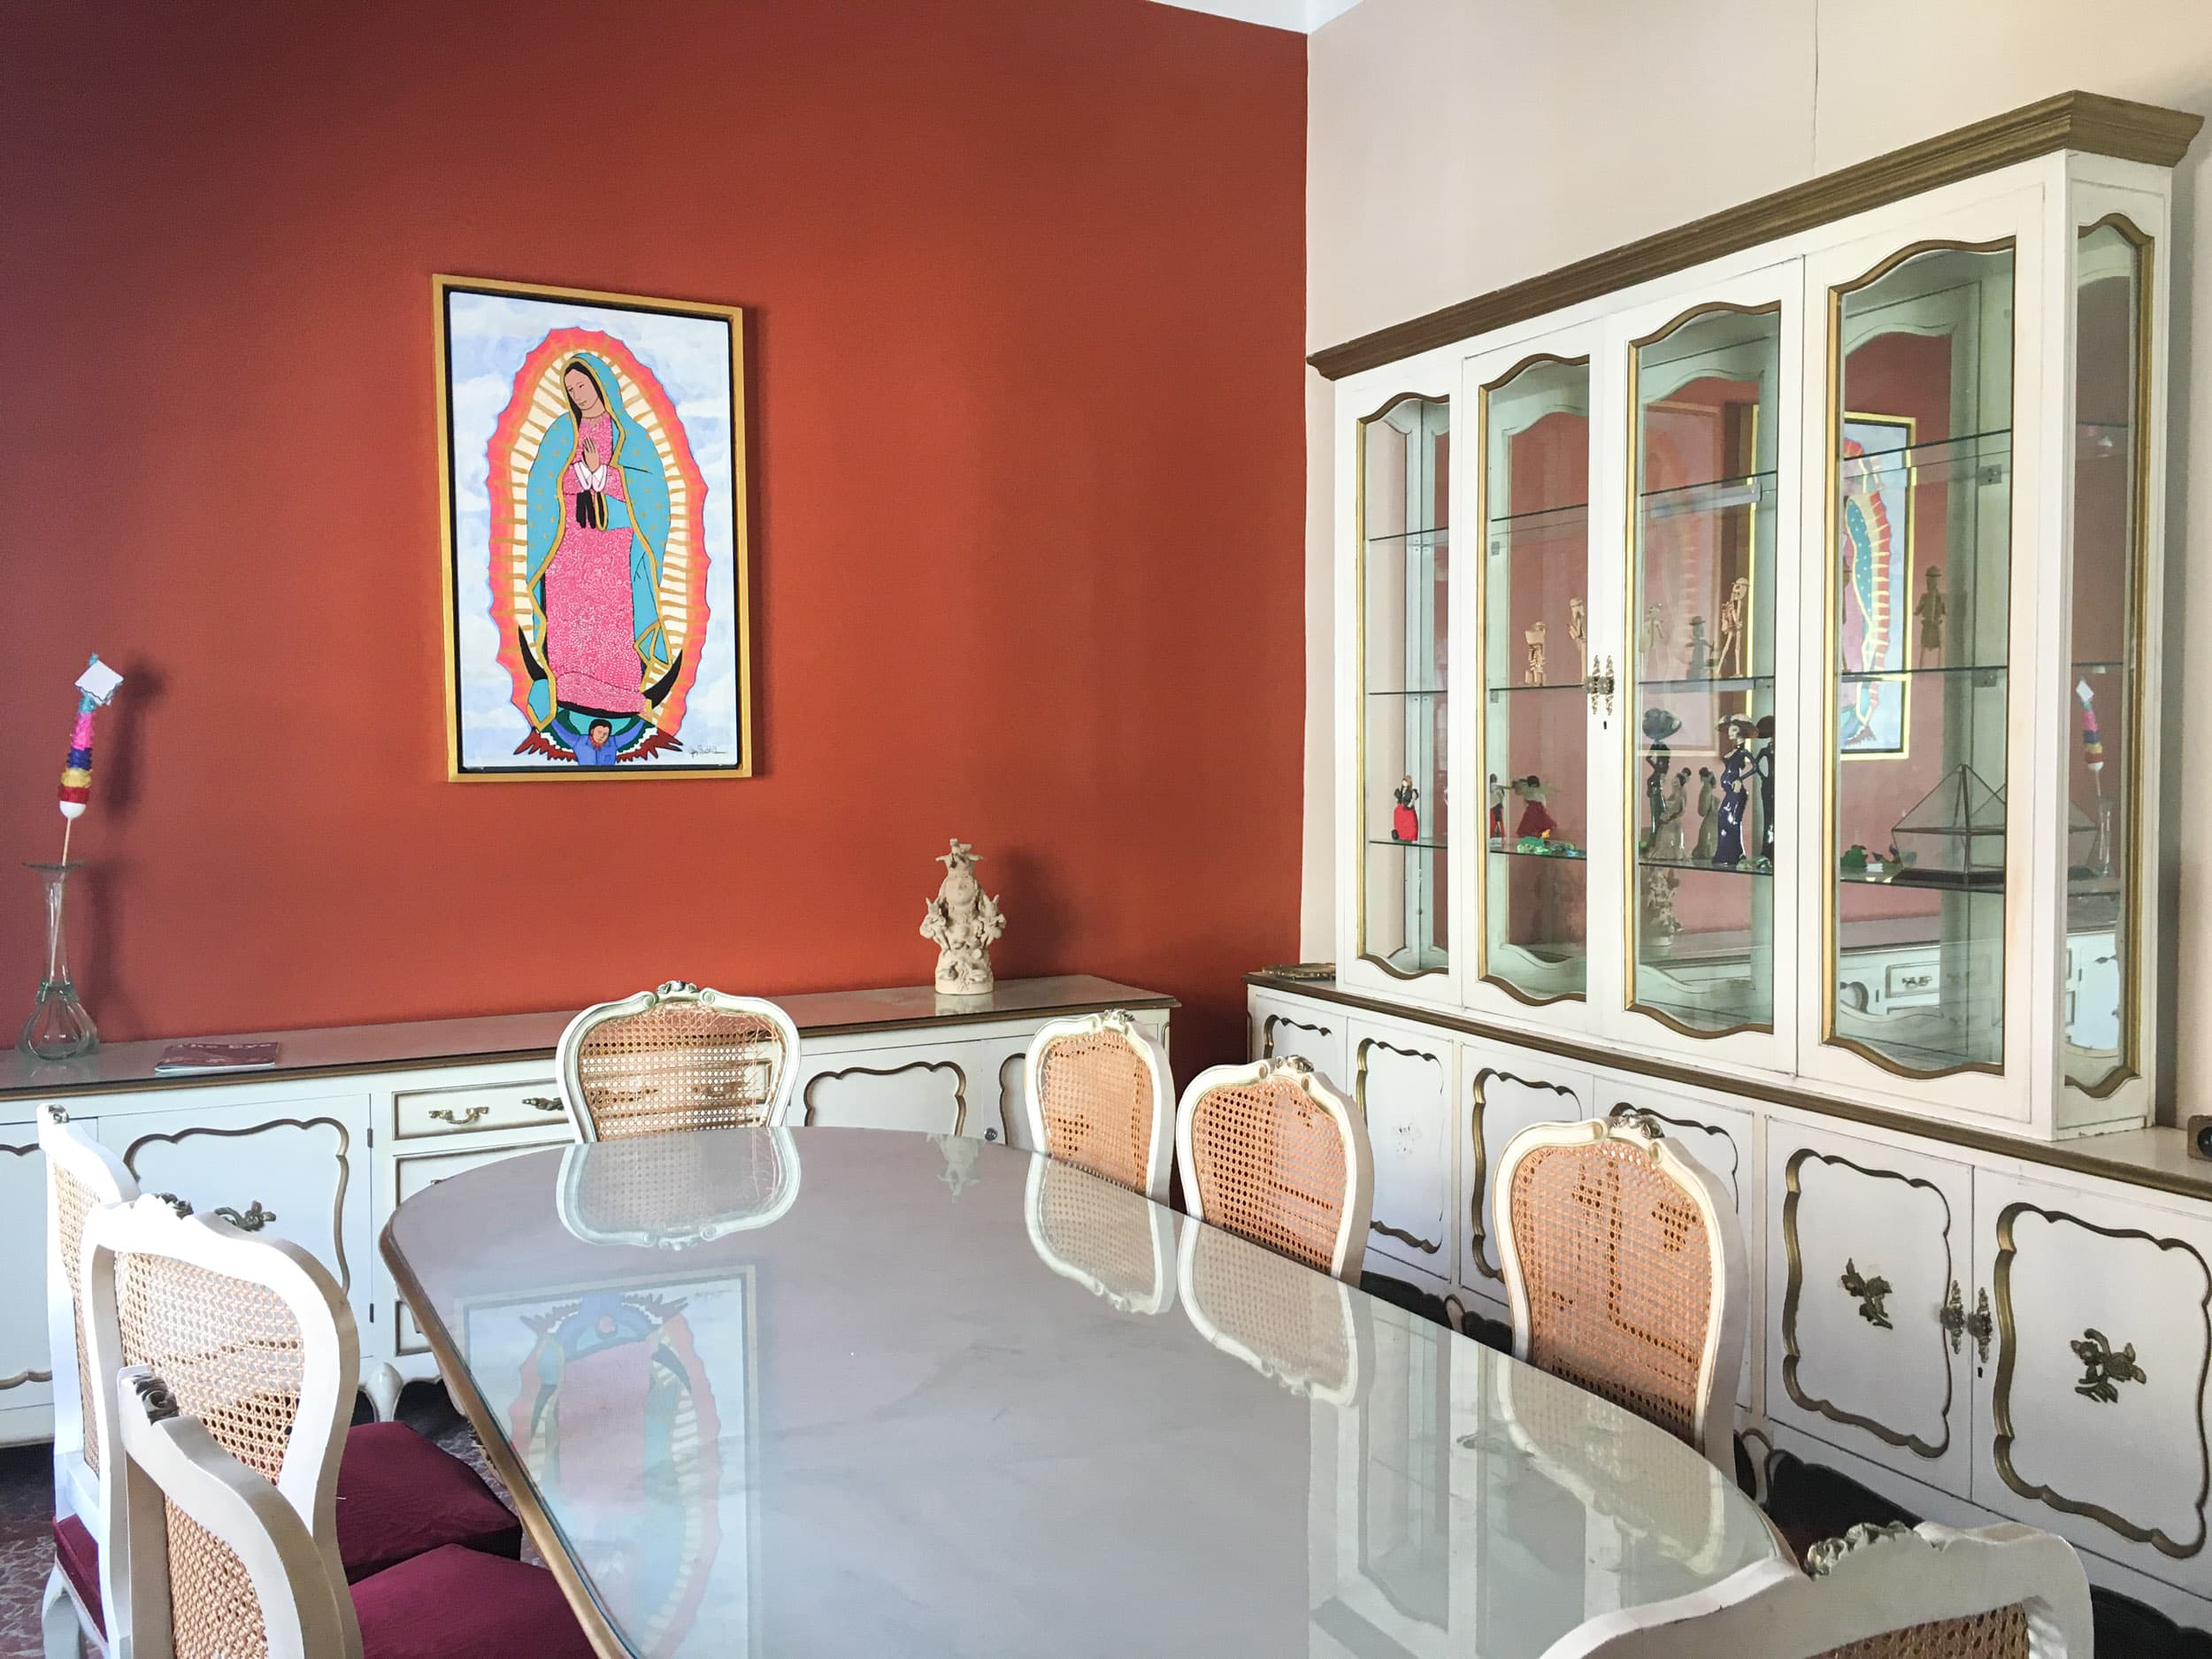 Dining room at an Airbnb in Oaxaca, Mexico